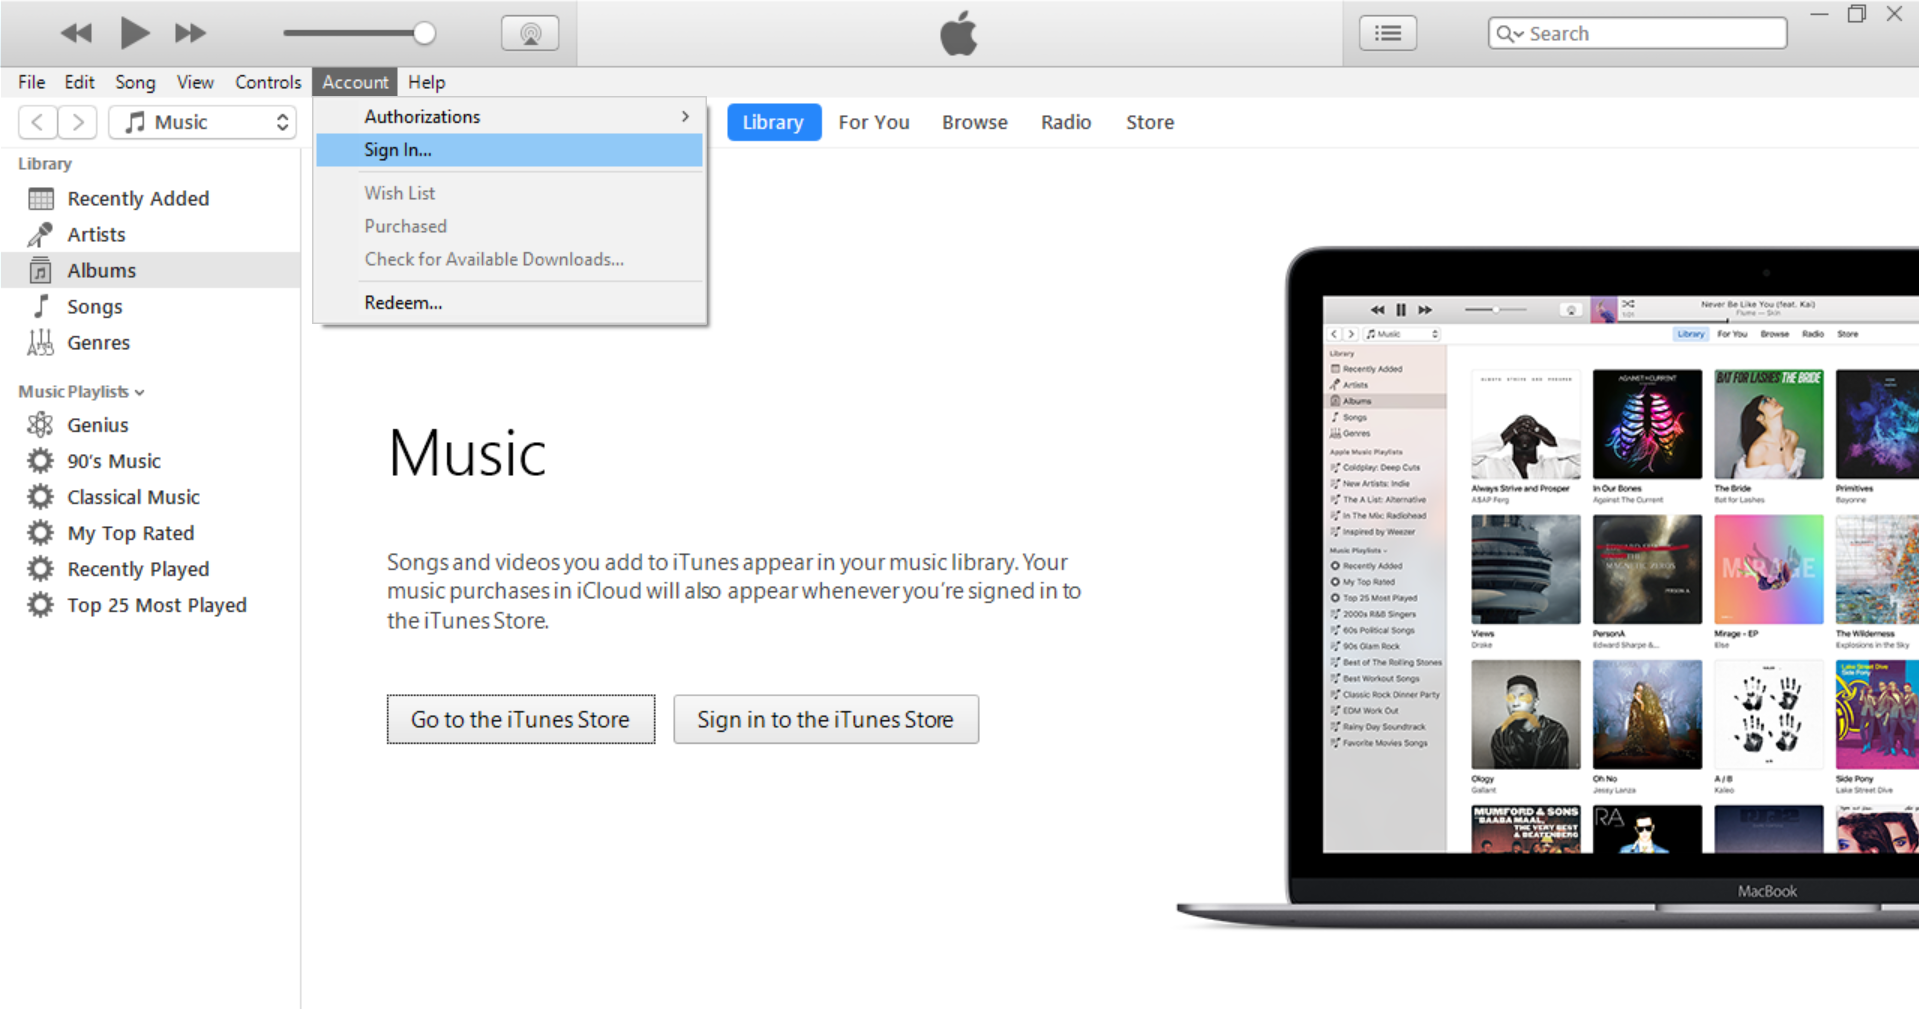 Download iTunes for Windows 10 – How To Install And Use iTunes on PC | DeviceDaily.com